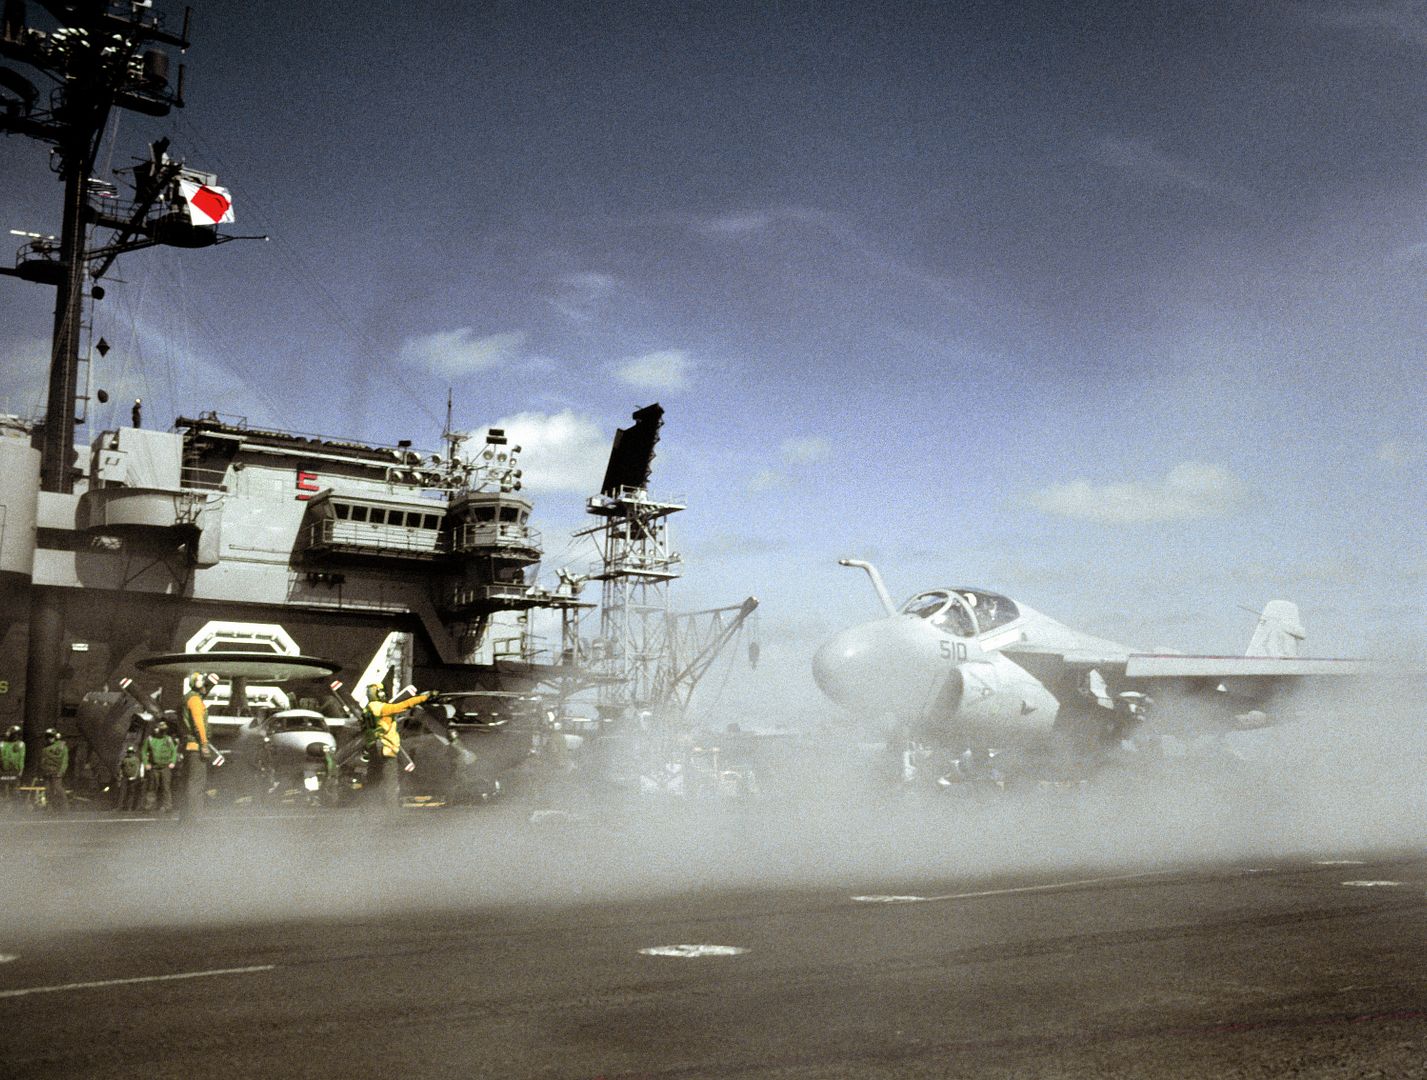 An A 6E Intruder Aircraft Is Positioned For Launch On The Flight Deck Of The Aircraft Carrier USS CONSTELLATION